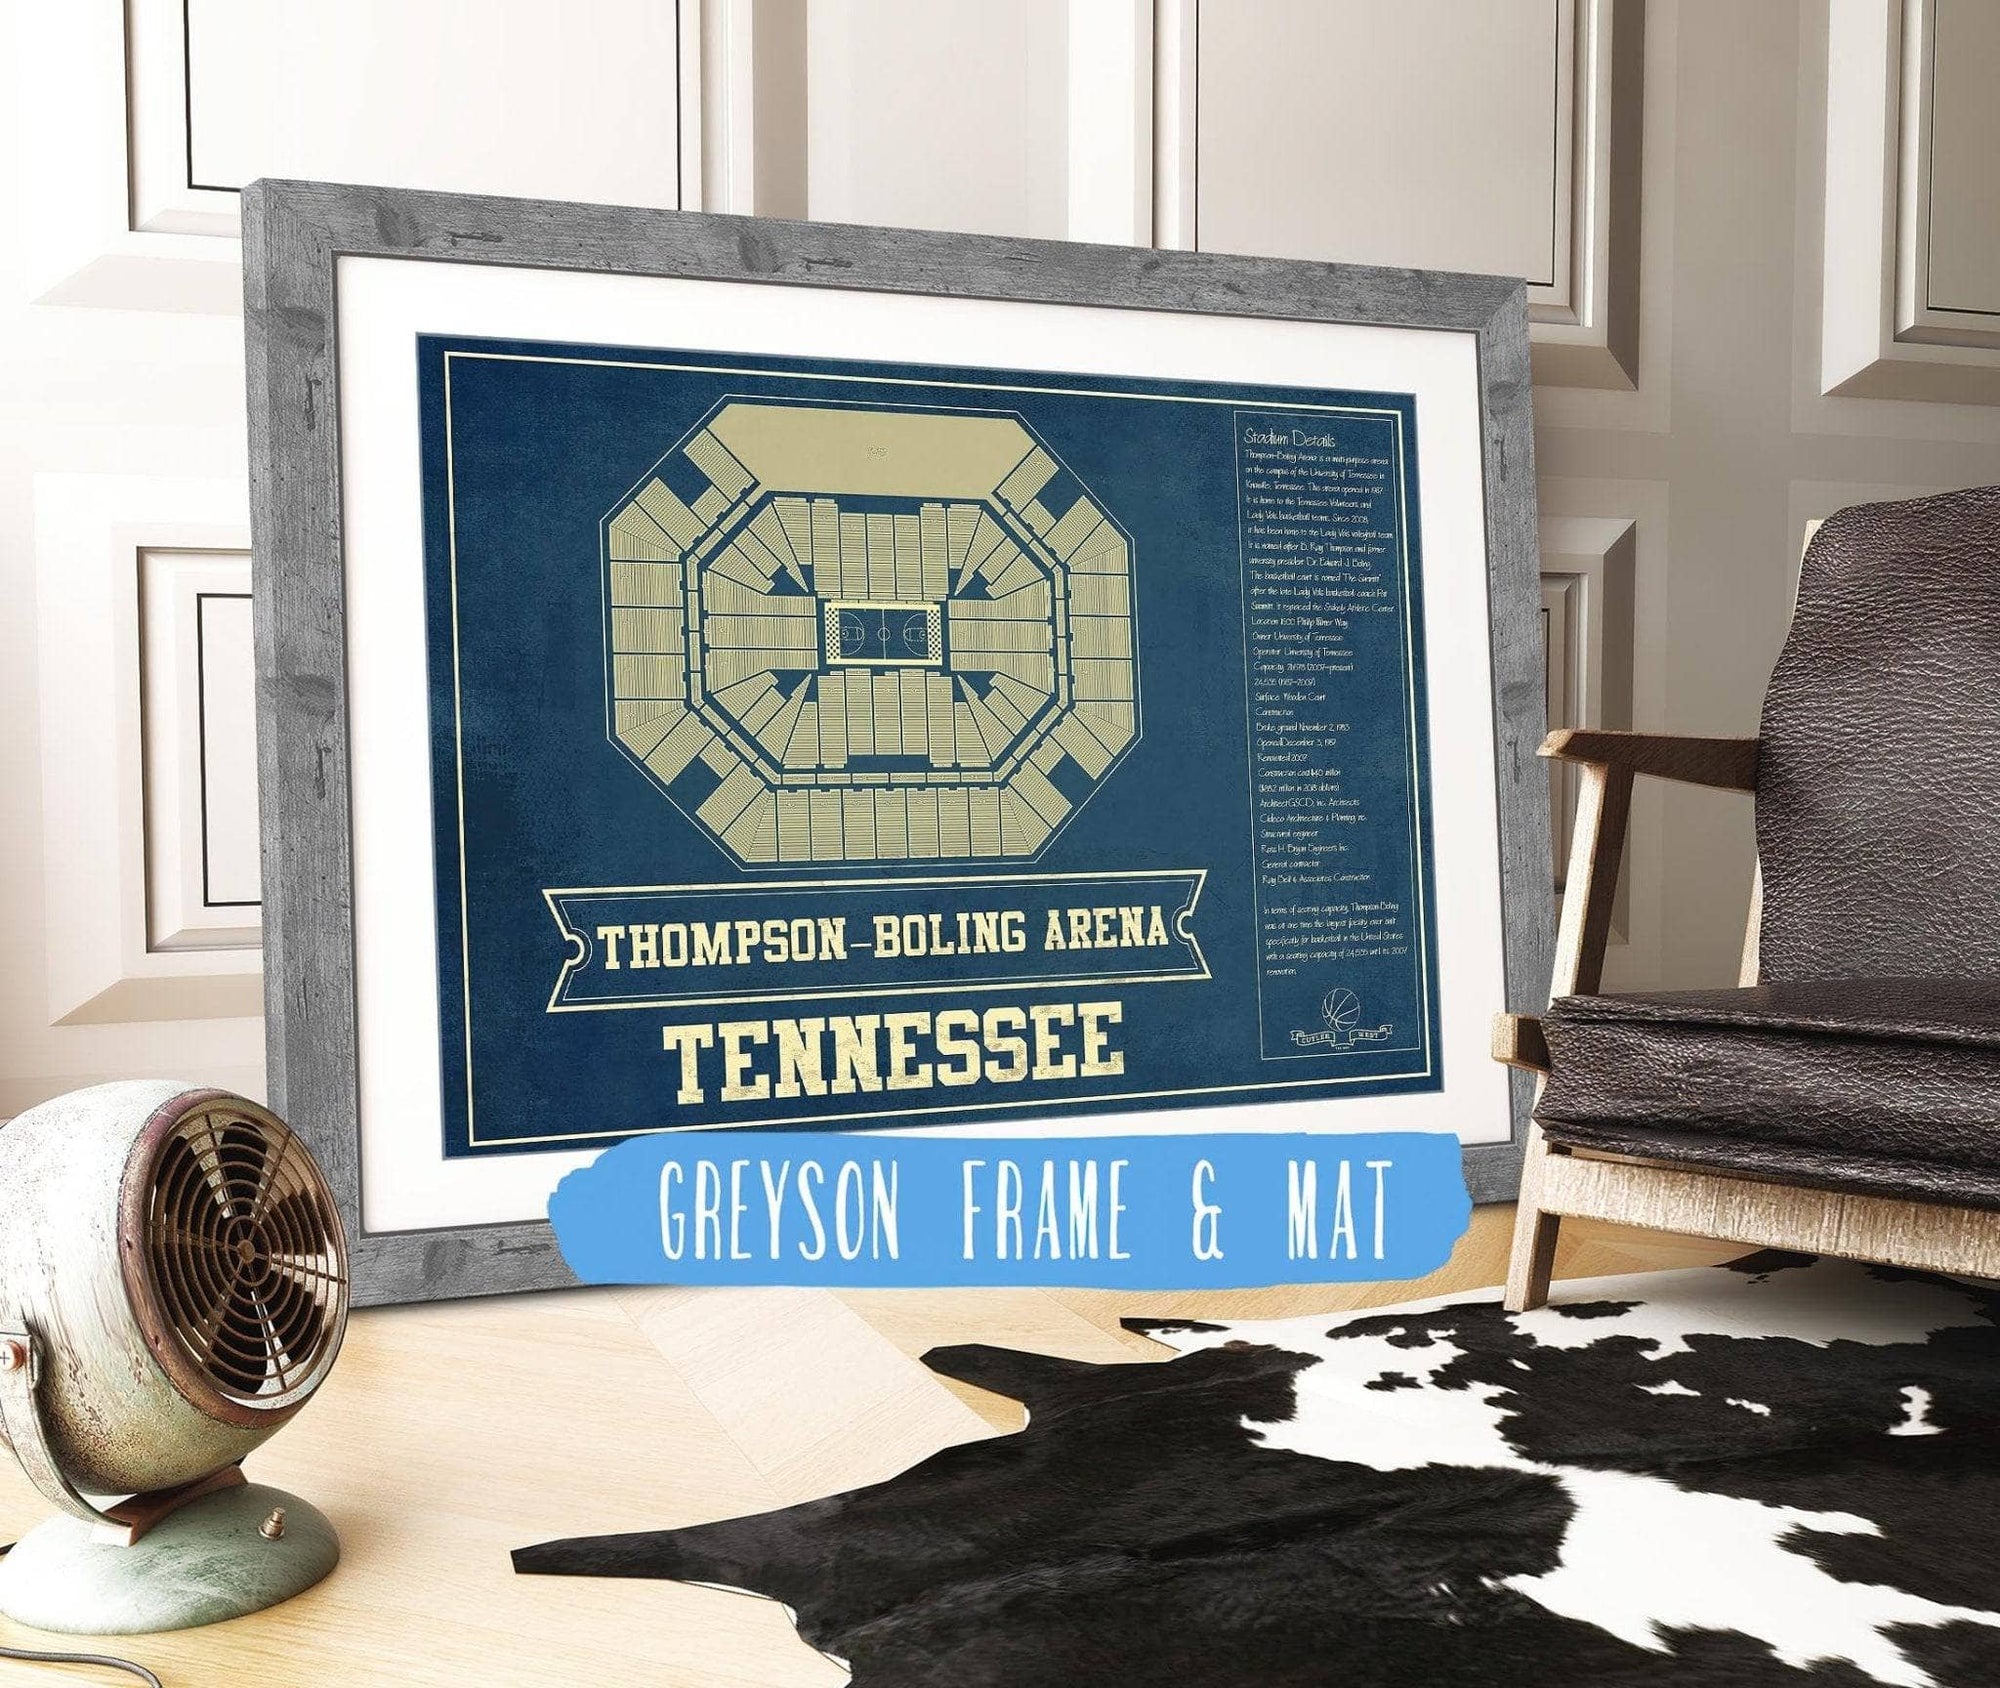 Cutler West Basketball Collection 14" x 11" / Greyson Frame & Mat Thompson–Boling Arena - Tennessee Volunteers, Lady Vols NCAA College Basketball Blueprint Art 93335021384688